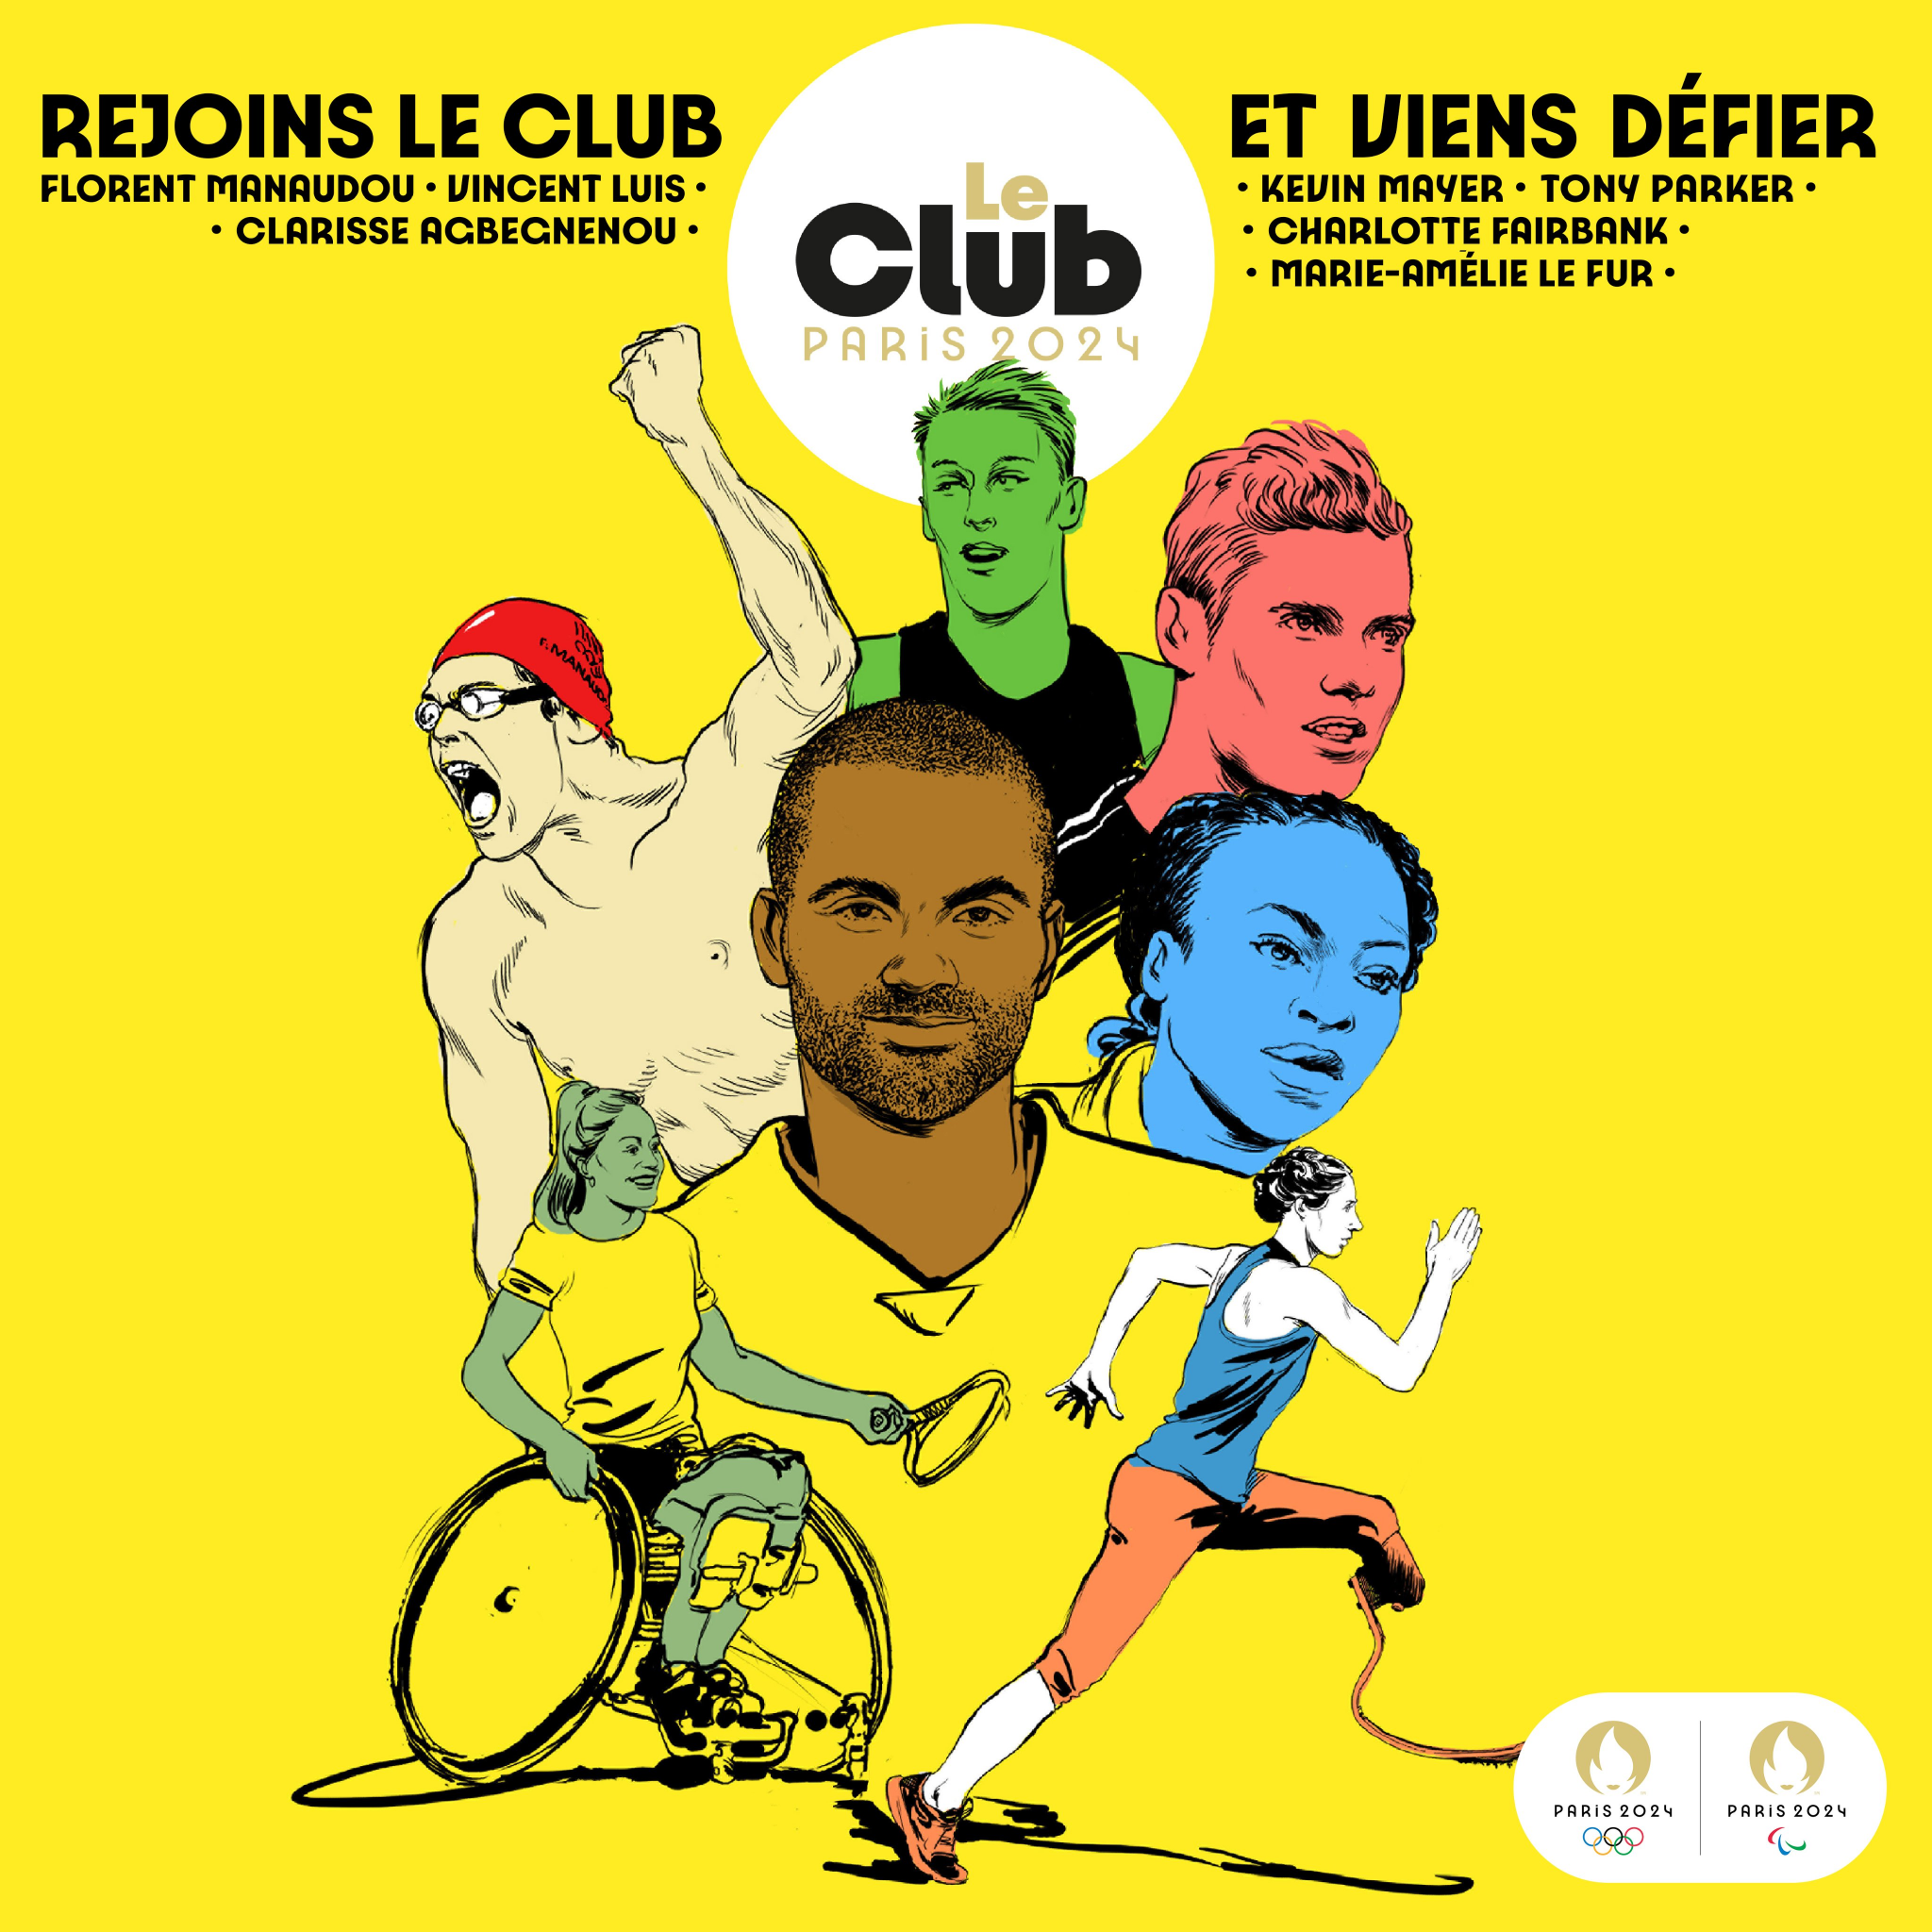 French sports stars will participate in challenges as part of Club Paris 2024 ©Paris 2024